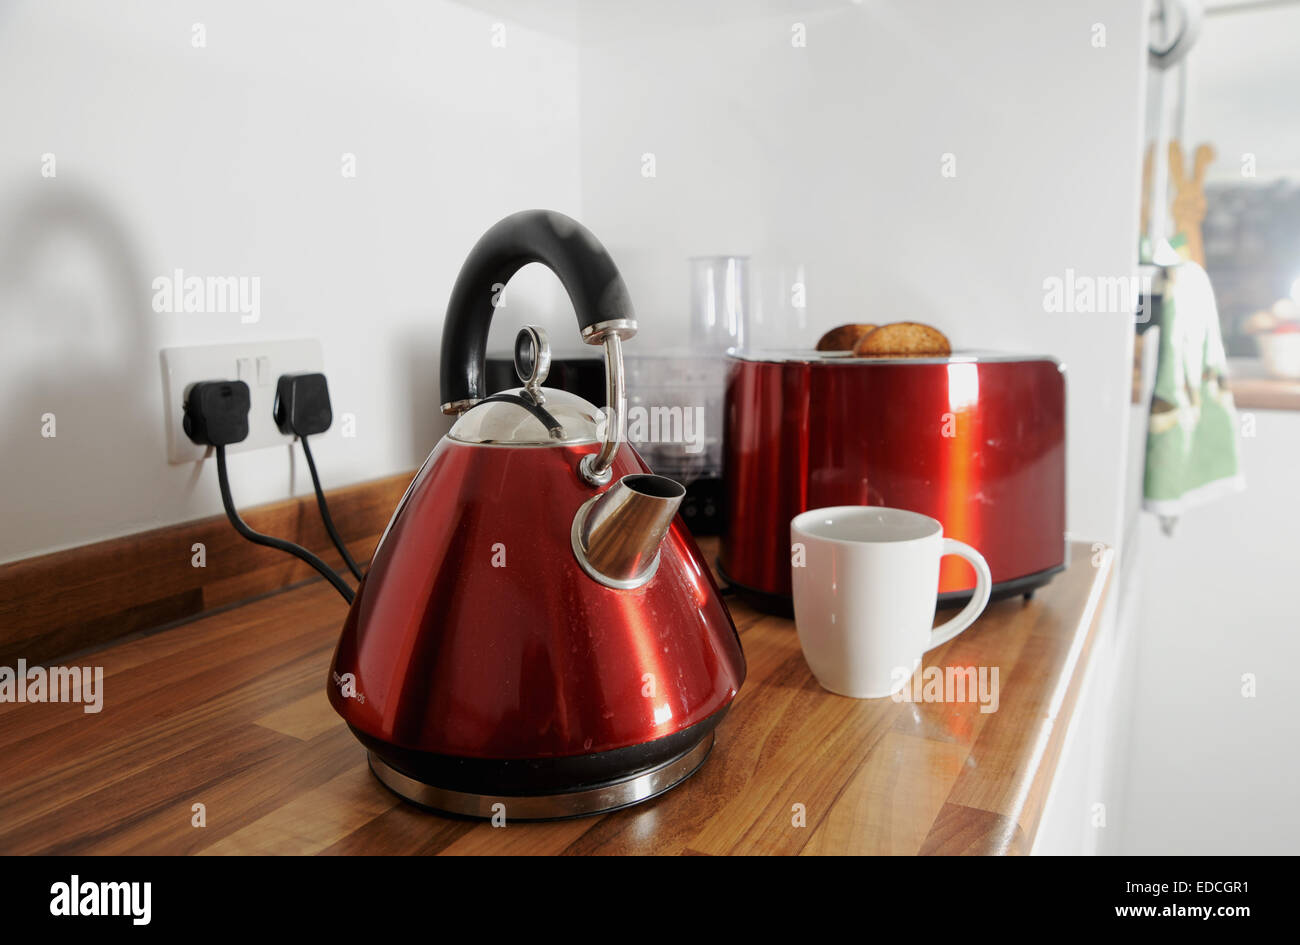 https://c8.alamy.com/comp/EDCGR1/kettle-boiling-with-steam-and-toaster-cooking-toast-behind-in-kitchen-EDCGR1.jpg